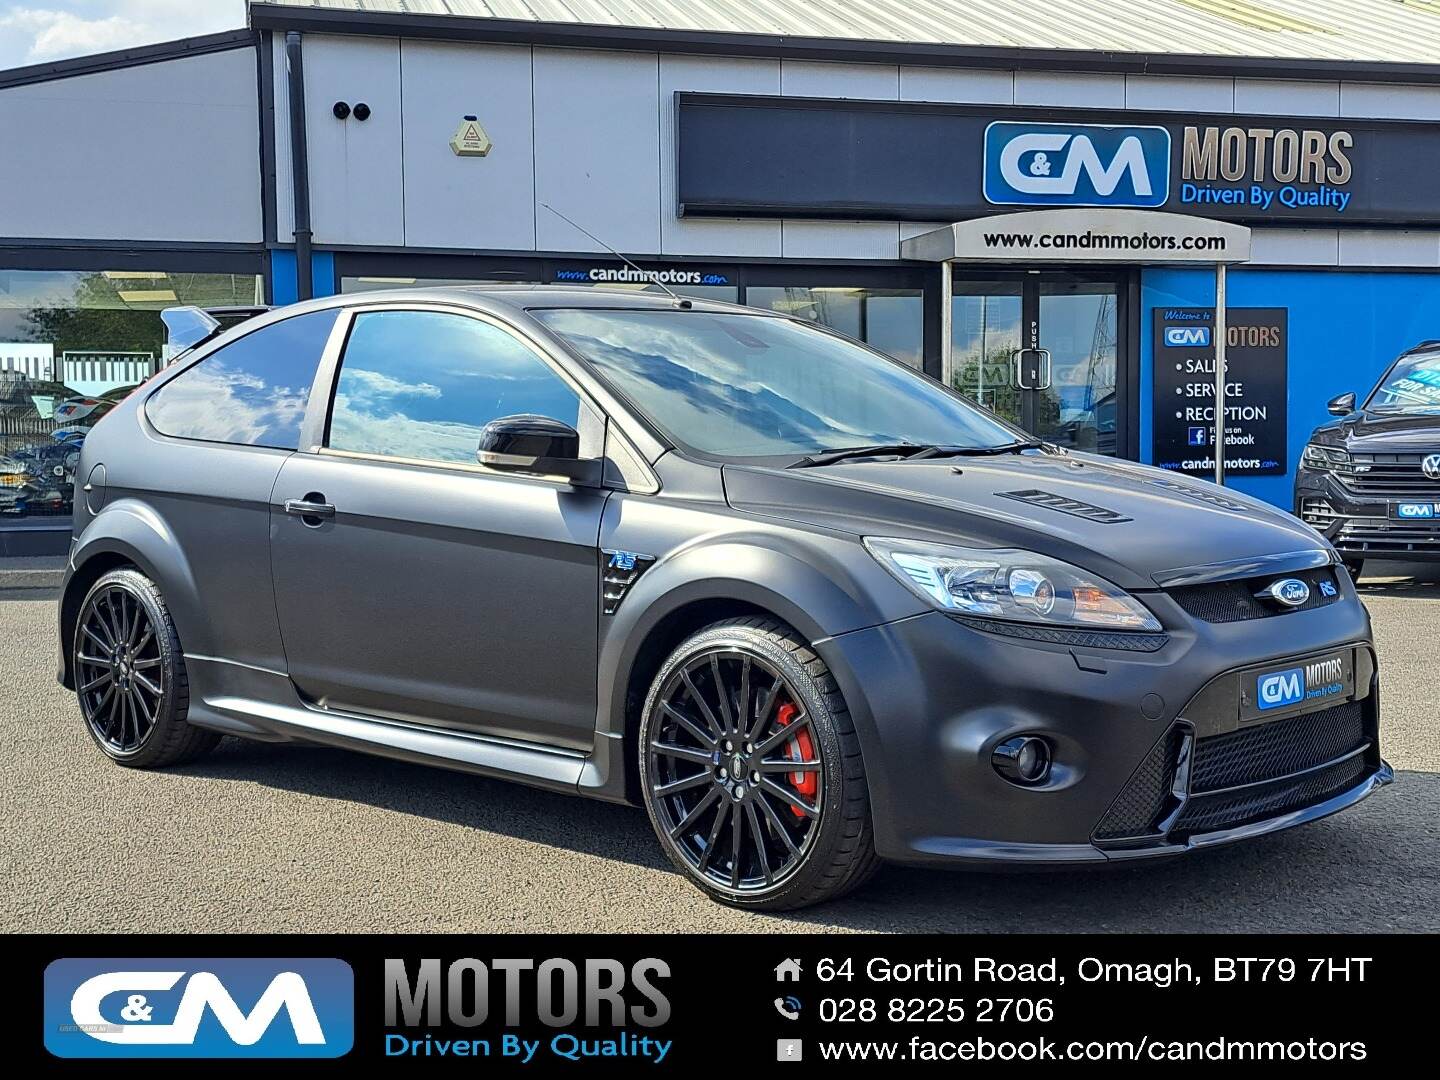 2010 Ford Focus (Mk2) RS500 for sale by classified listing privately in  Fafe, Braga, Portugal